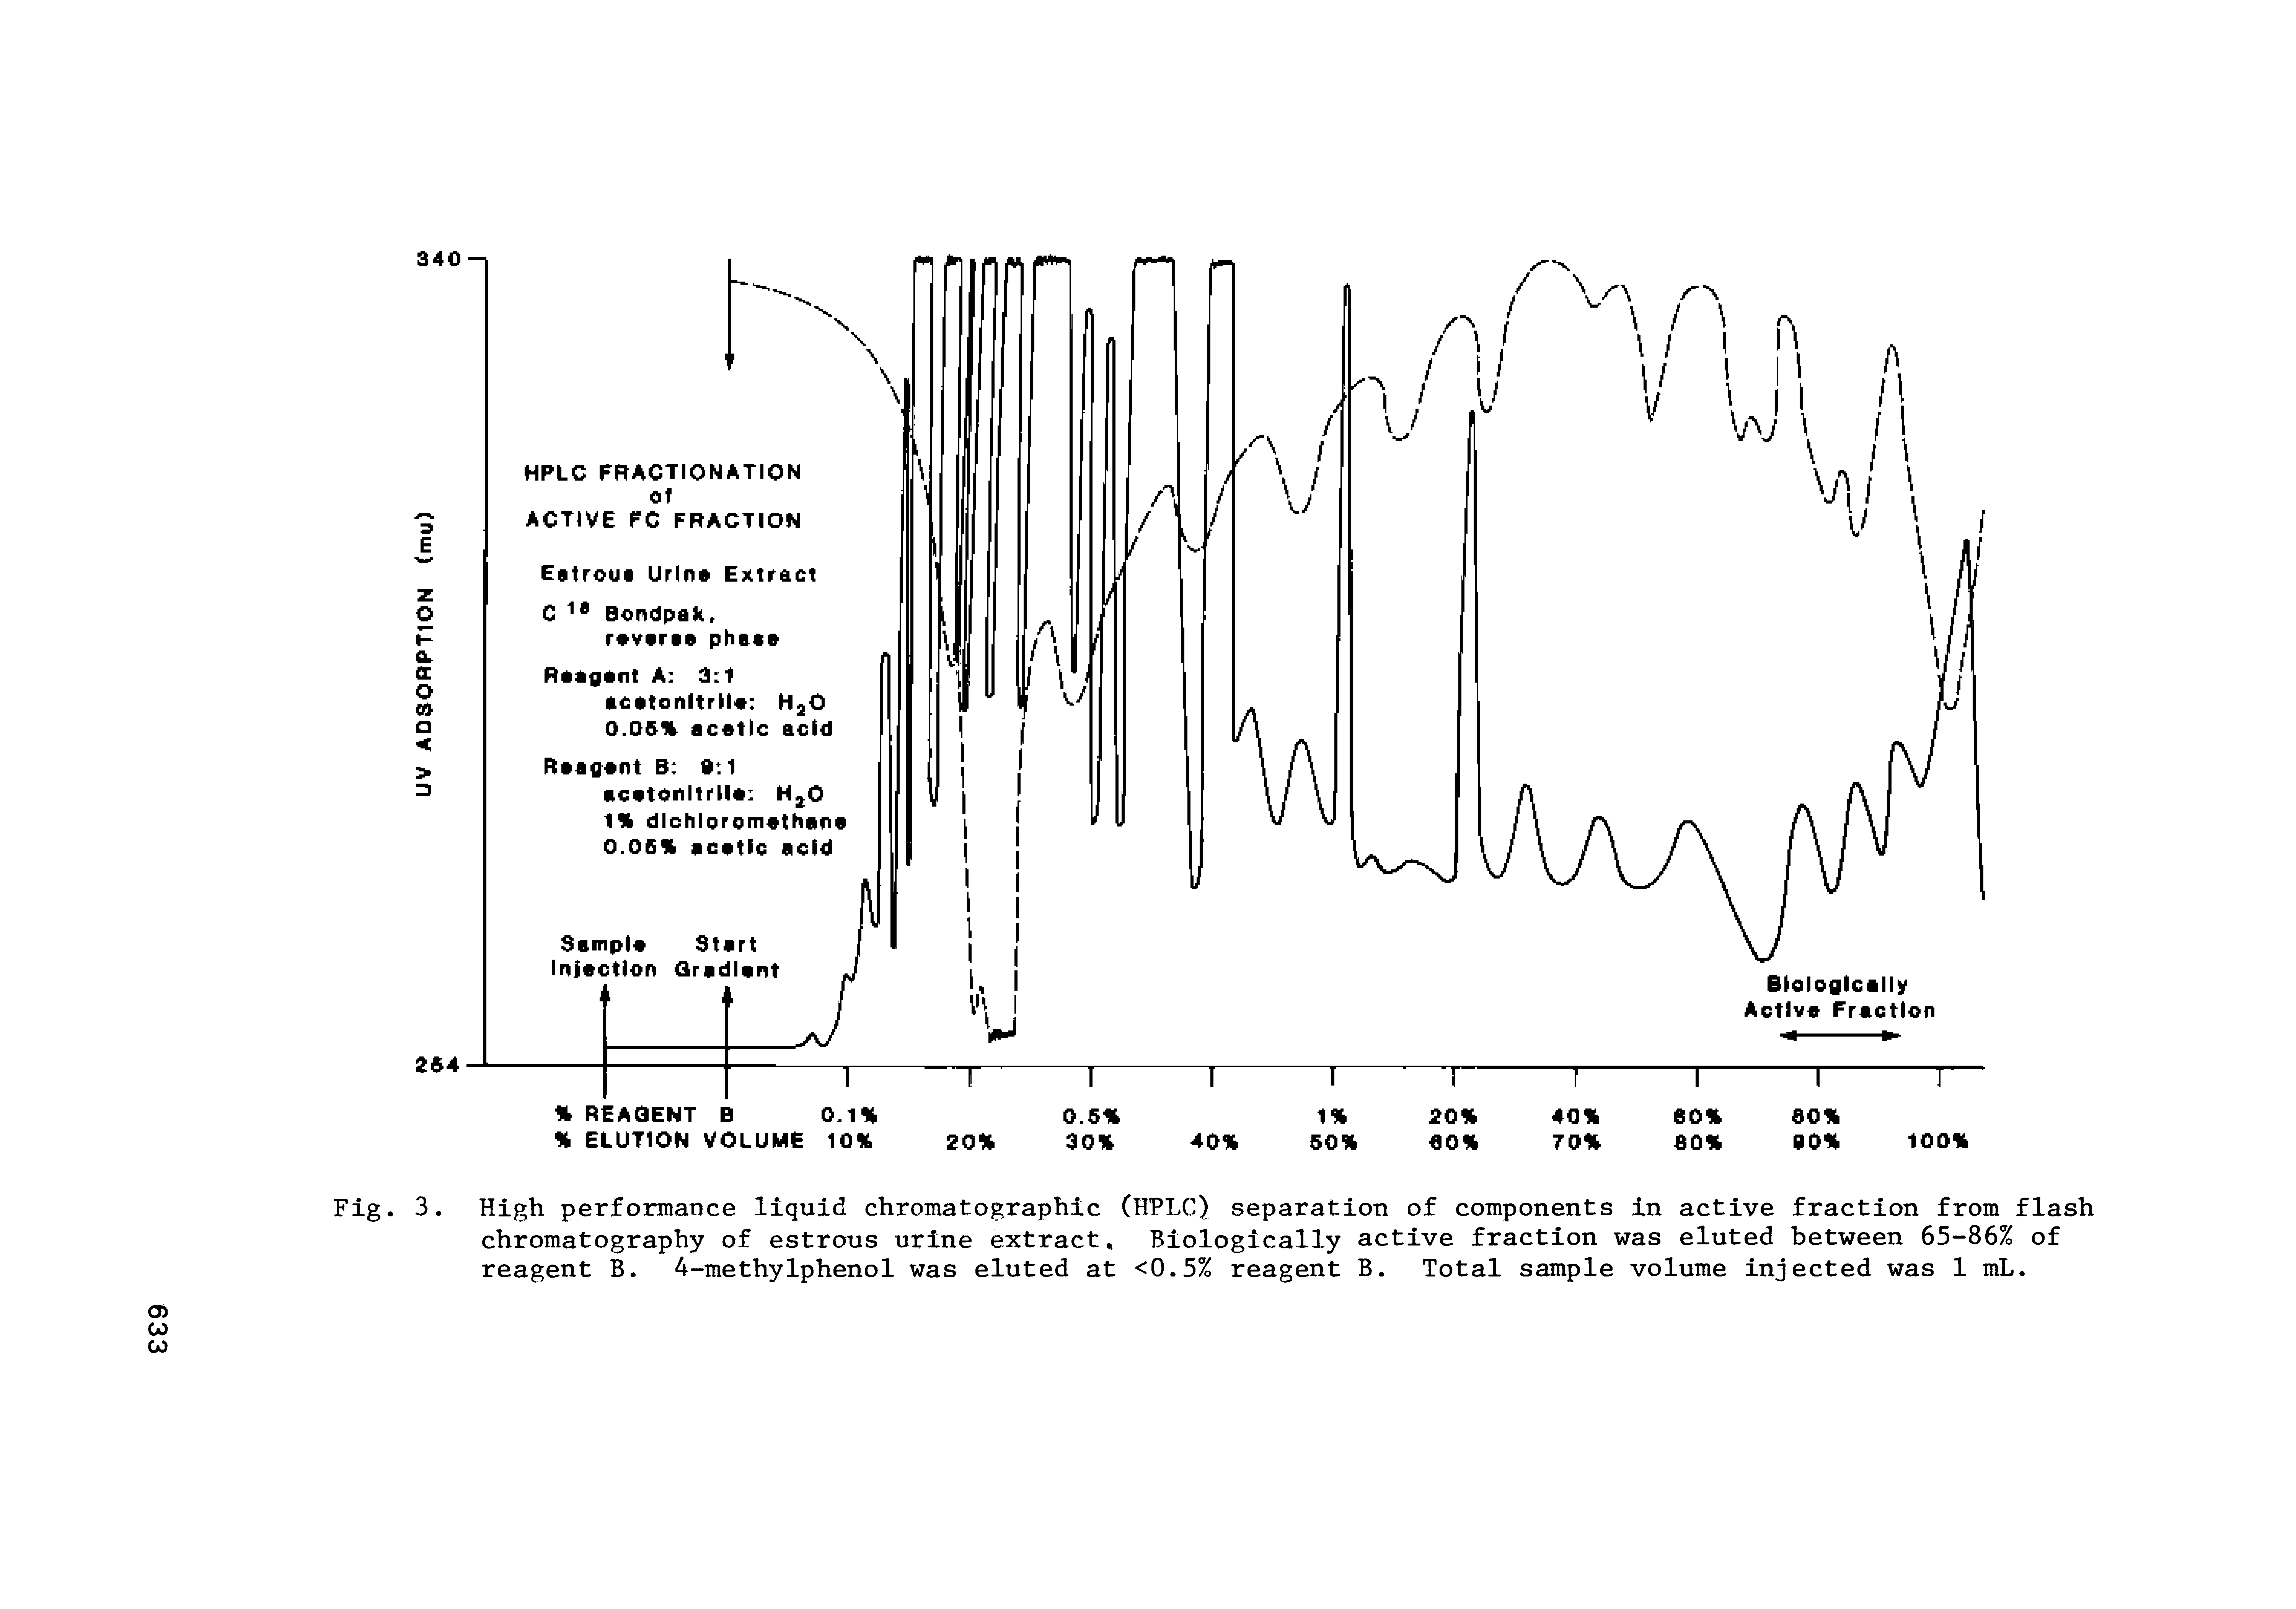 Fig. 3. High performance liquid chromatographic (HPLC) separation of components in active fraction from flash chromatography of estrous urine extract. Biologically active fraction was eluted between 65-86% of reagent B. 4-methylphenol was eluted at <0.5% reagent B. Total sample volume injected was 1 mL.